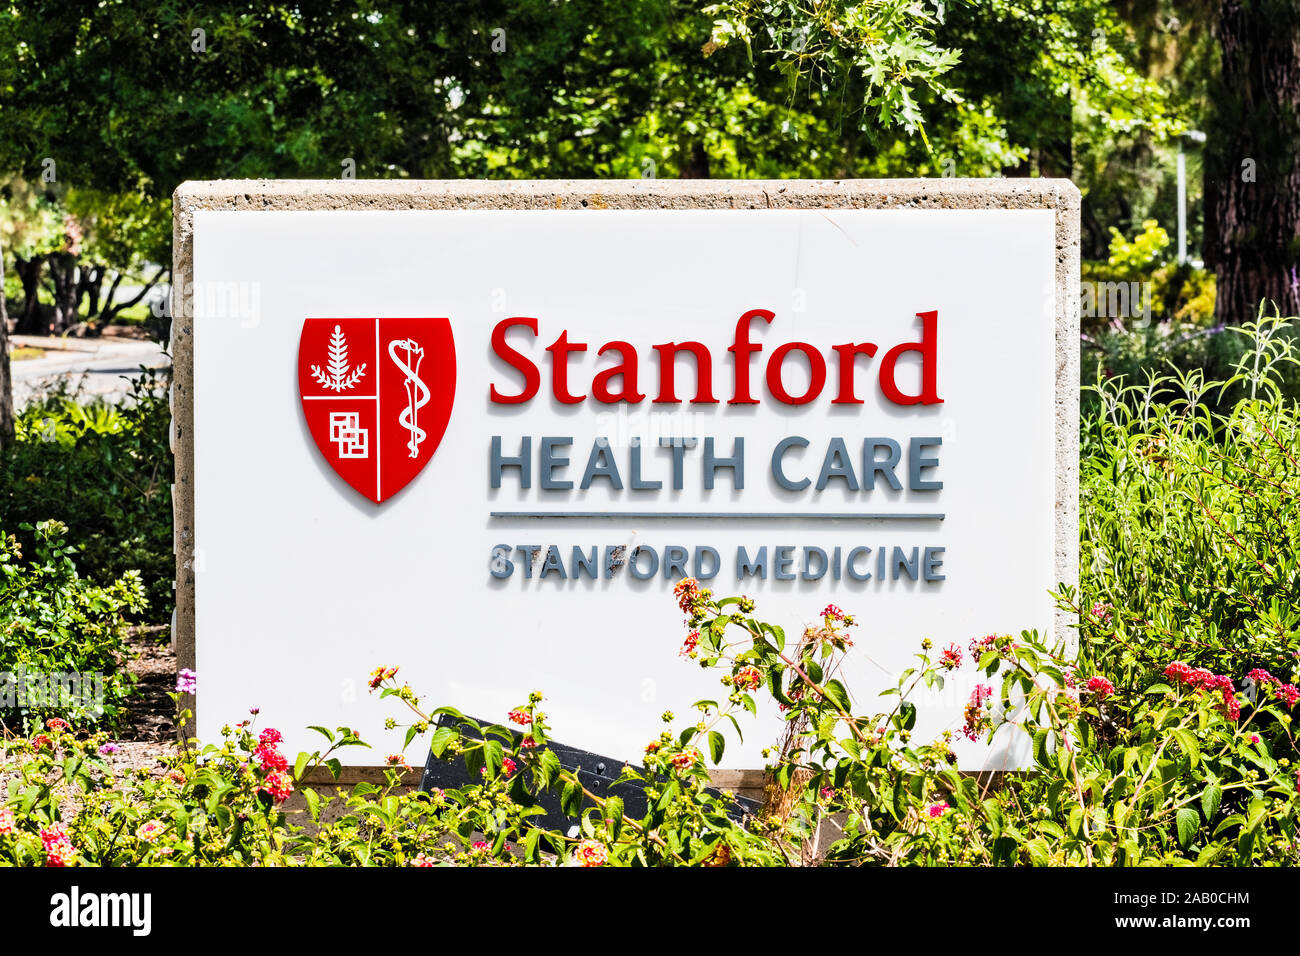 Nov 2, 2019 Redwood City / CA / USA - Stanford Health Care facility; Stanford Health Care comprises a network of medical facilities and doctors locate Stock Photo